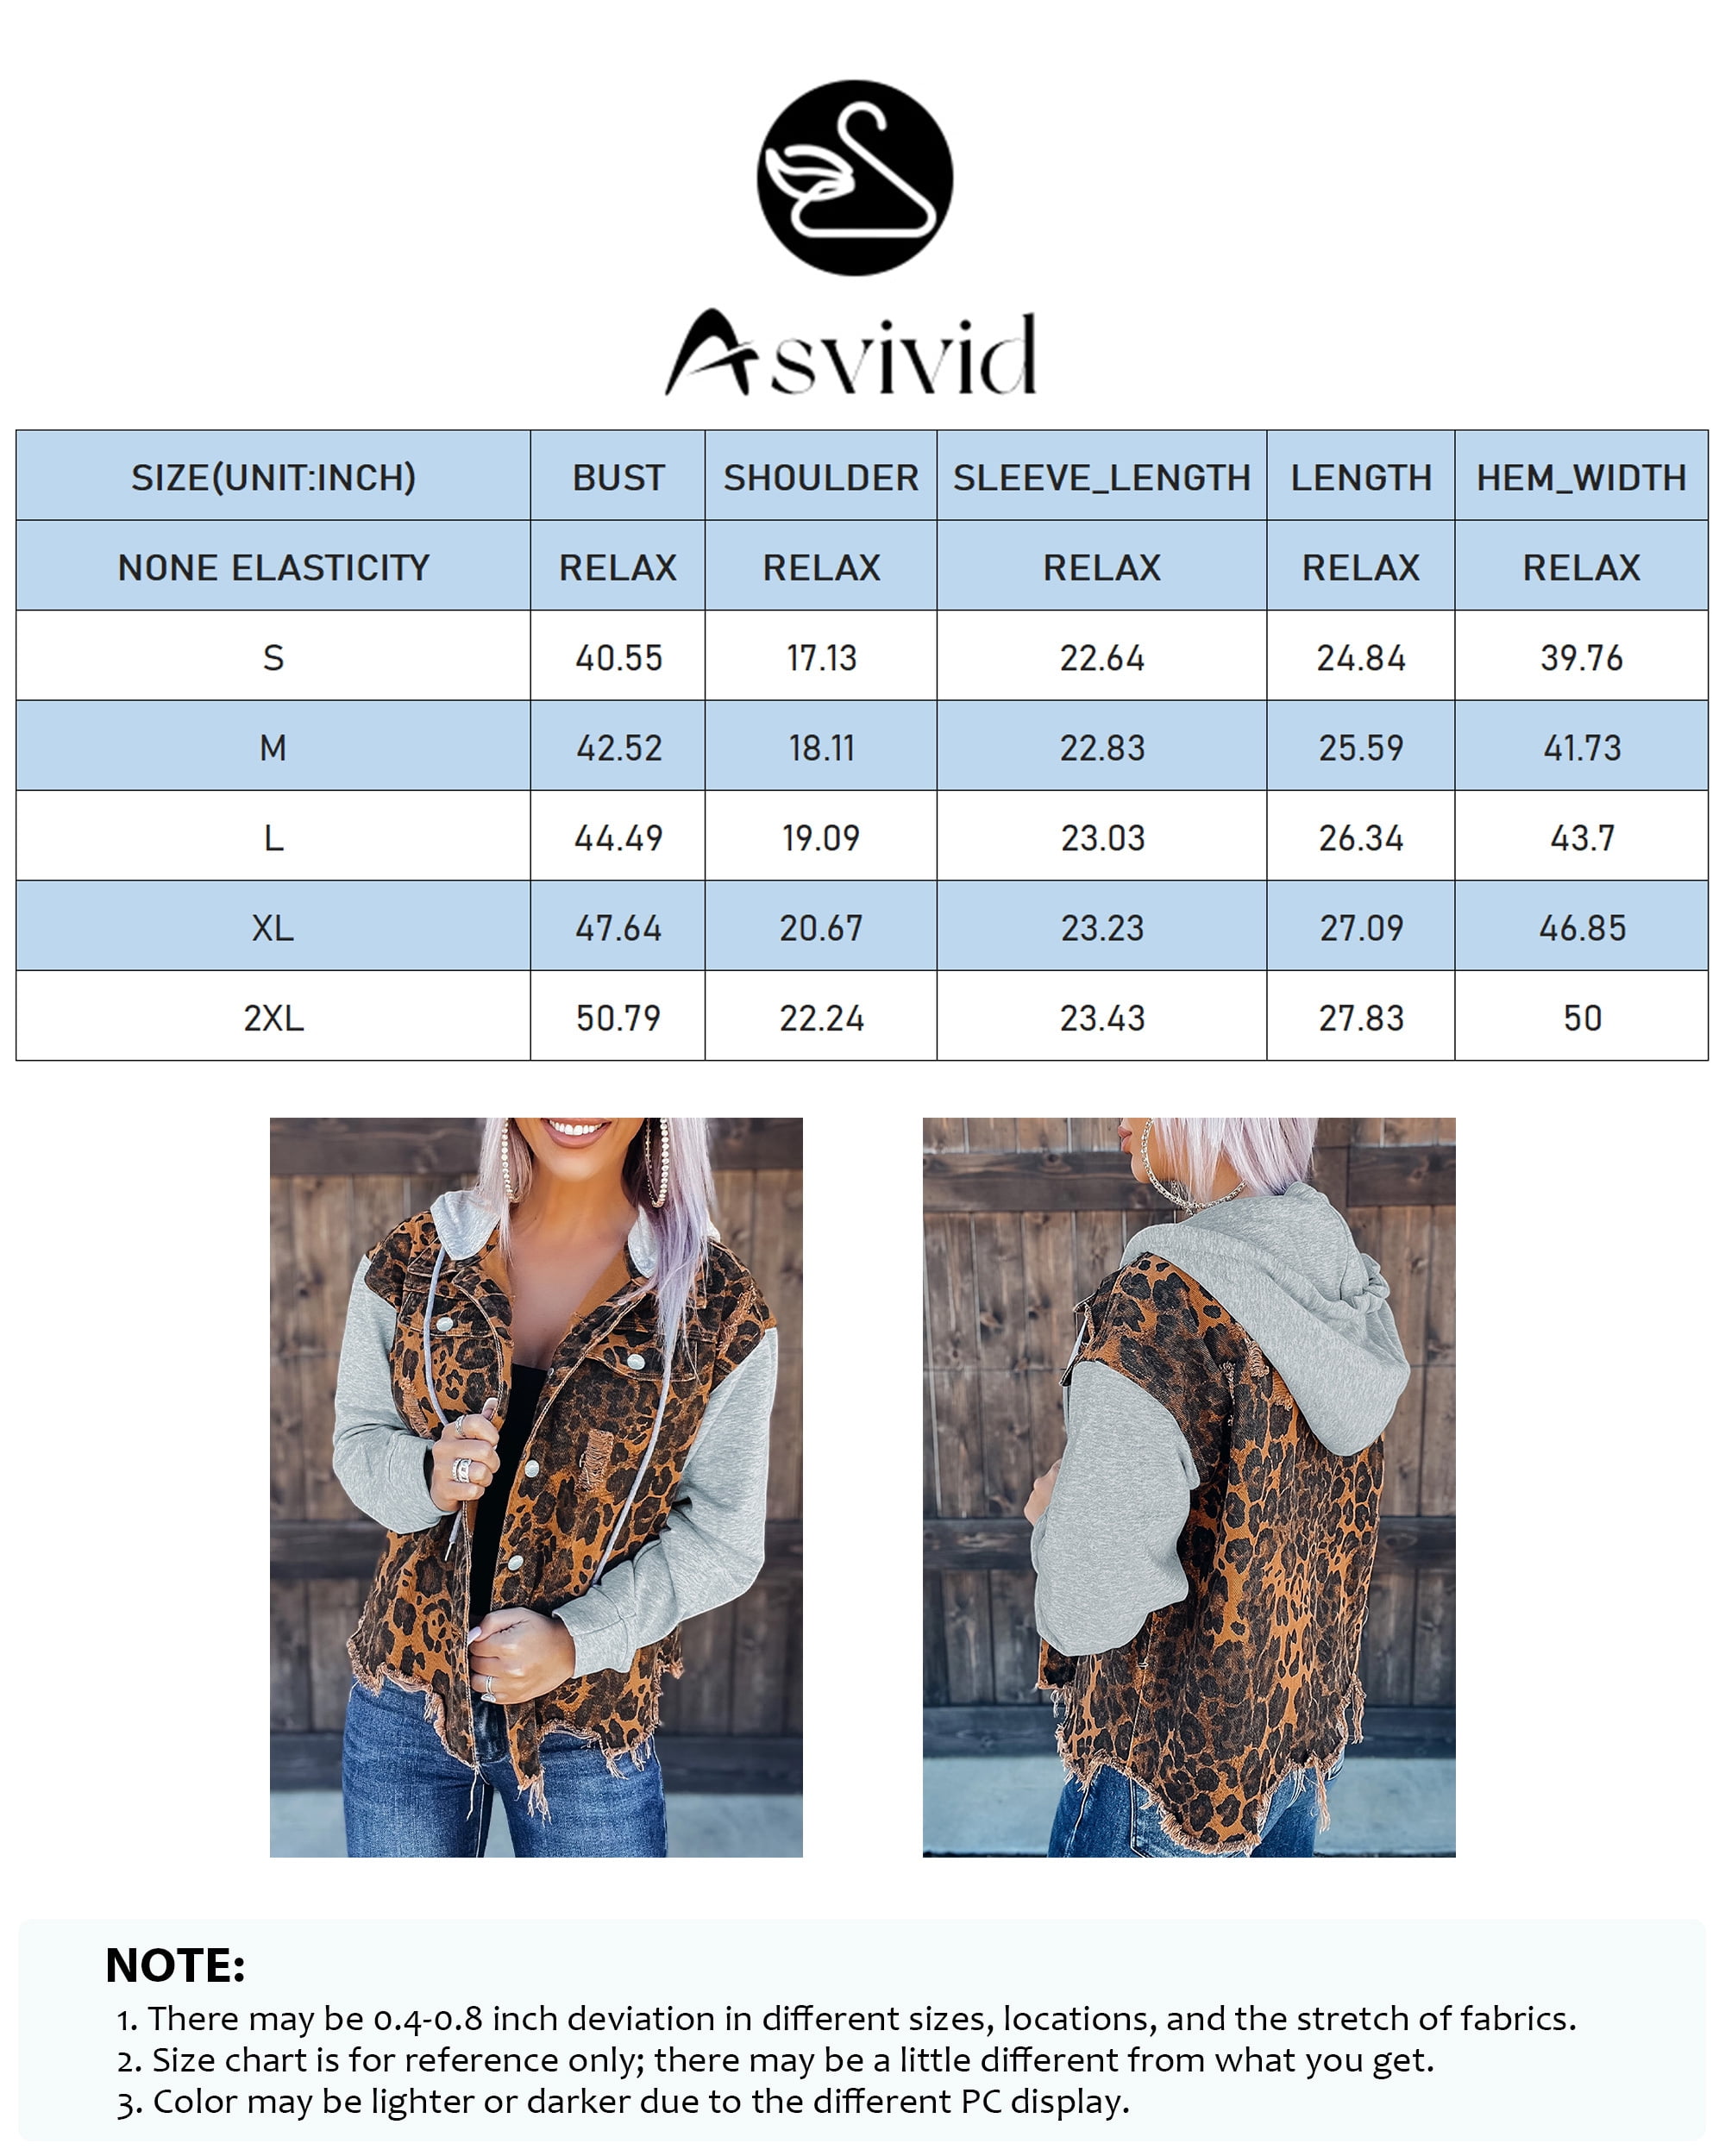 Asvivid Women's Denim Jacket Long Sleeve Washed Jean Jacket Casual Graphic Print Button Front Loose Fit Coat Outwear, Size: Large, Blue